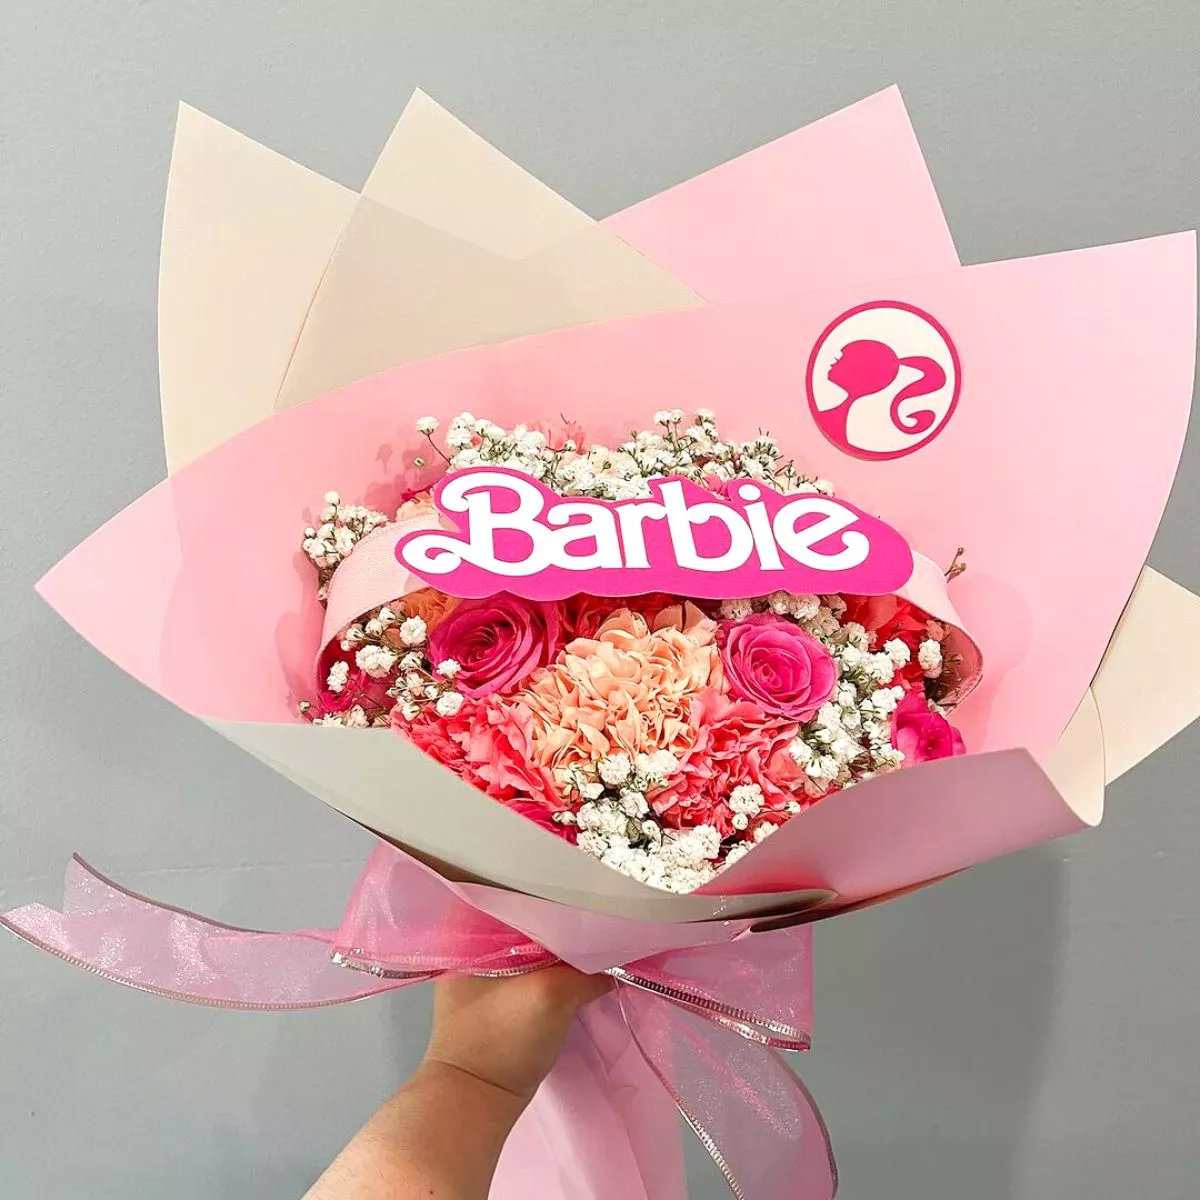 Barbie themed arrangement with roses